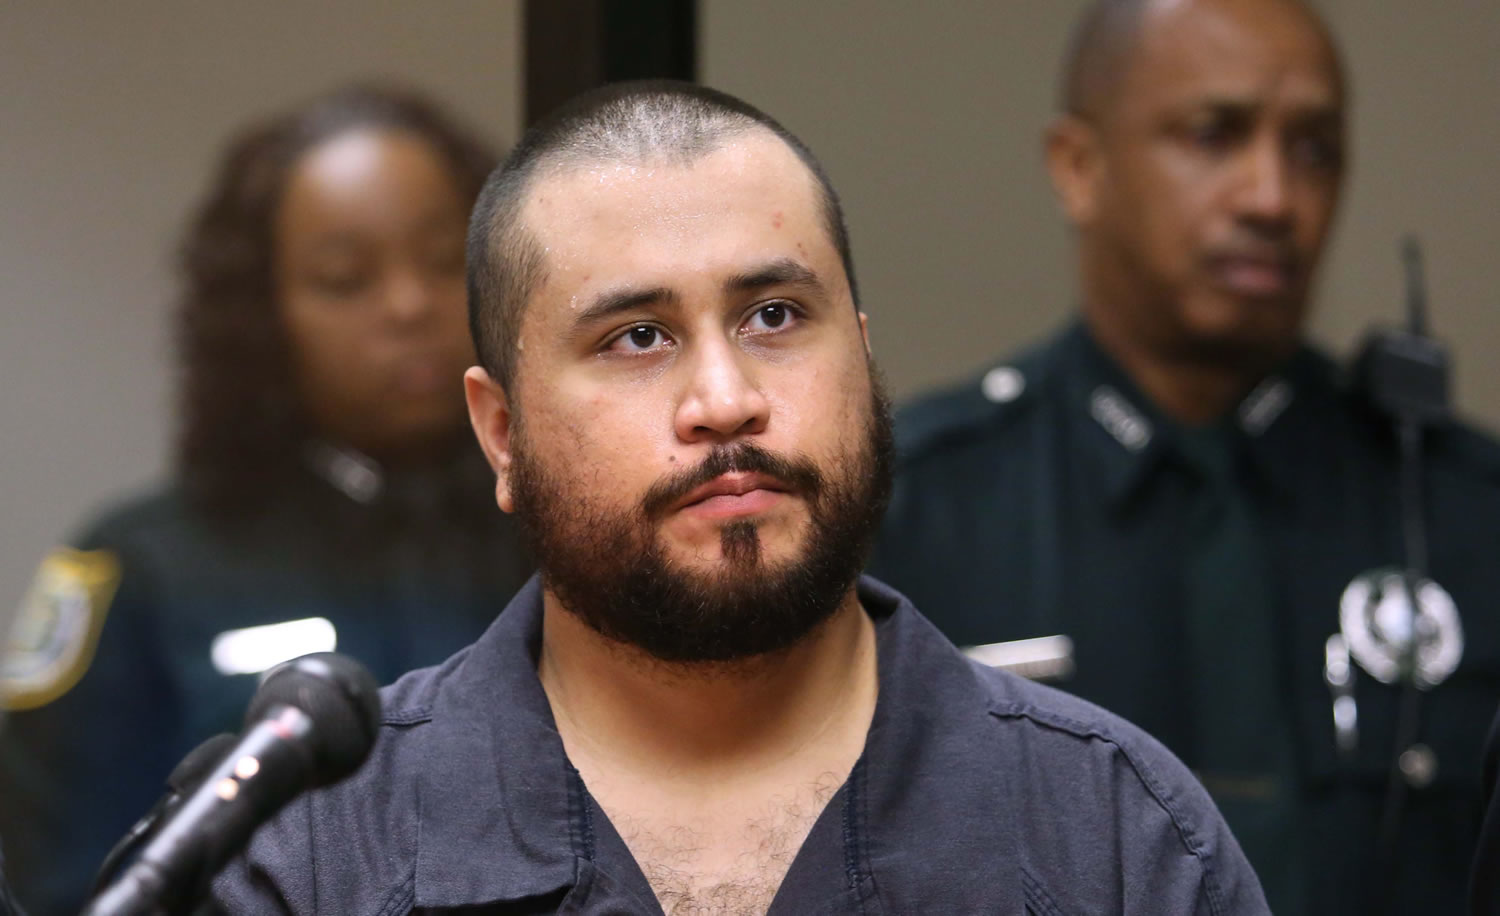 George Zimmerman, acquitted in the high-profile killing of unarmed black teenager Trayvon Martin, listens in court Nov. 19 in Sanford, Fla., during his hearing on charges including aggravated assault stemming from a fight with his girlfriend.